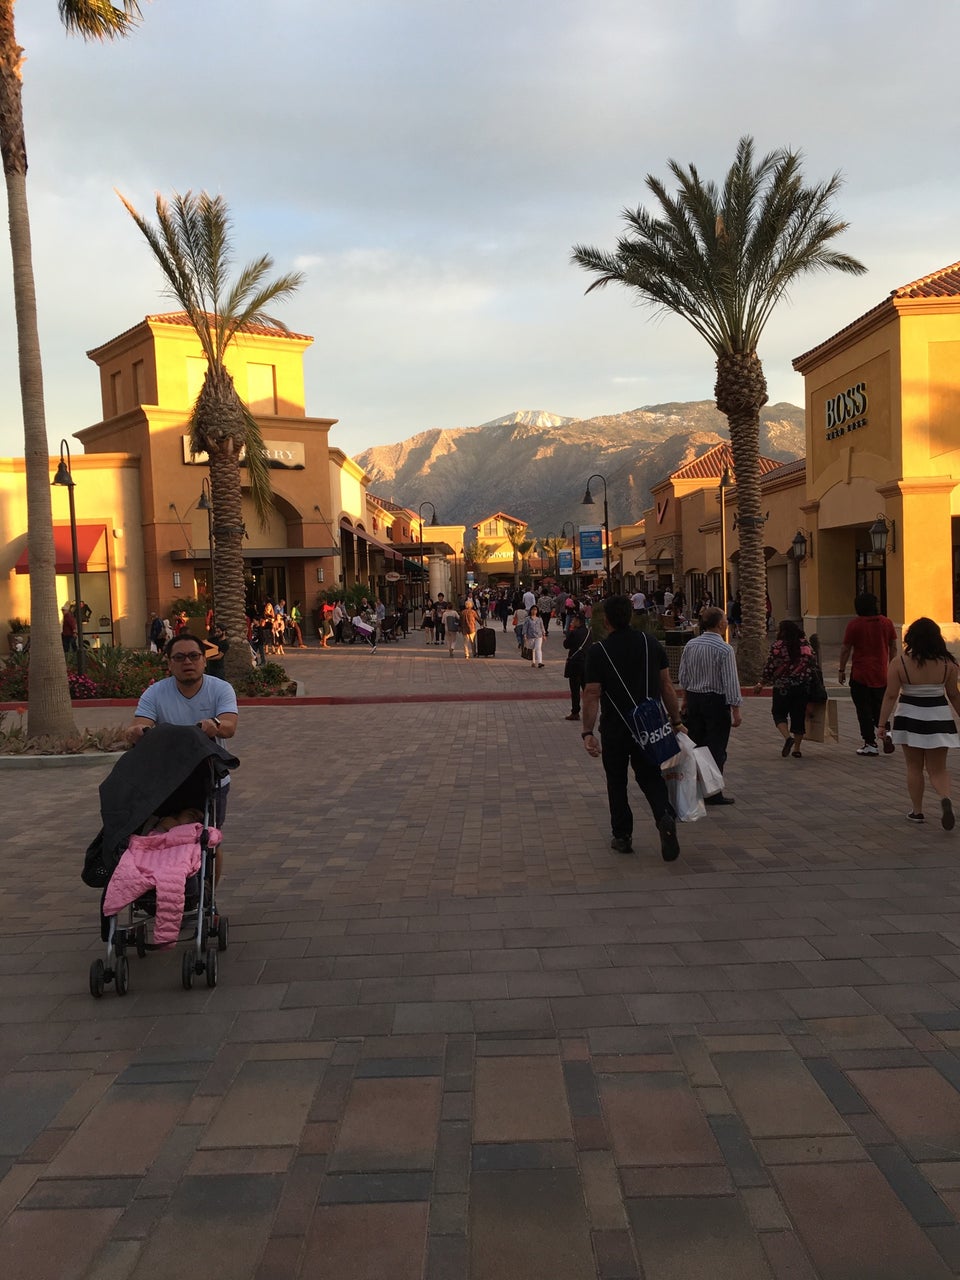 What a Bargain at Desert Hills Premium Outlet - Cabazon, Palm Spring  California